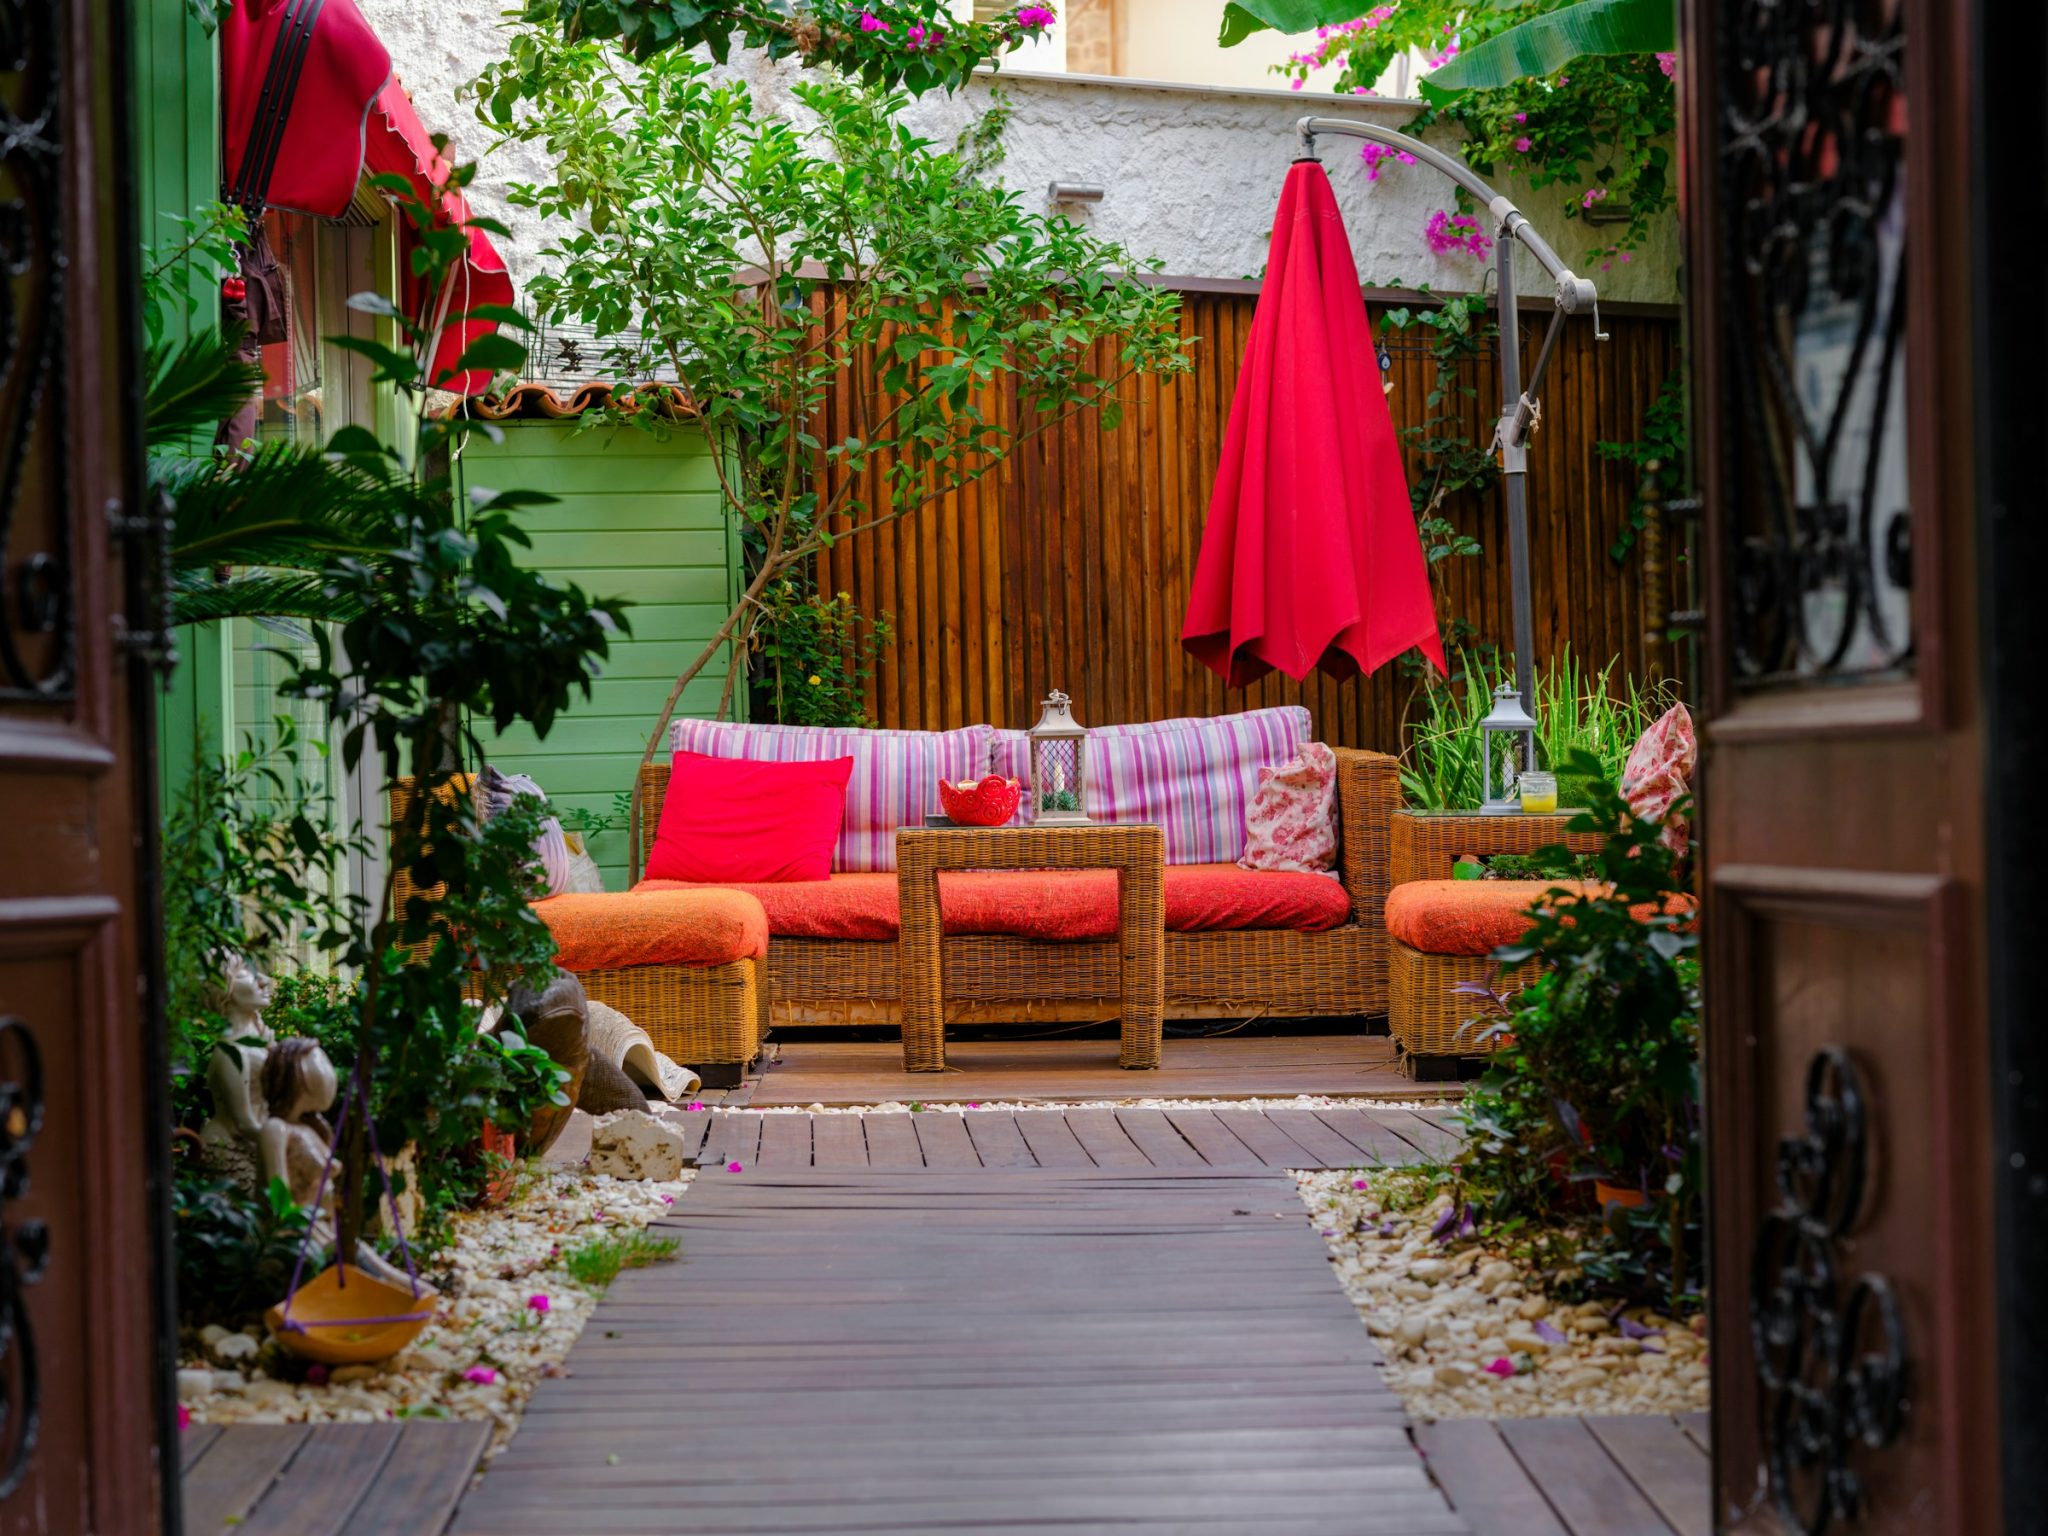 Garden romance: elevate your outdoor space with stunning decorative accents